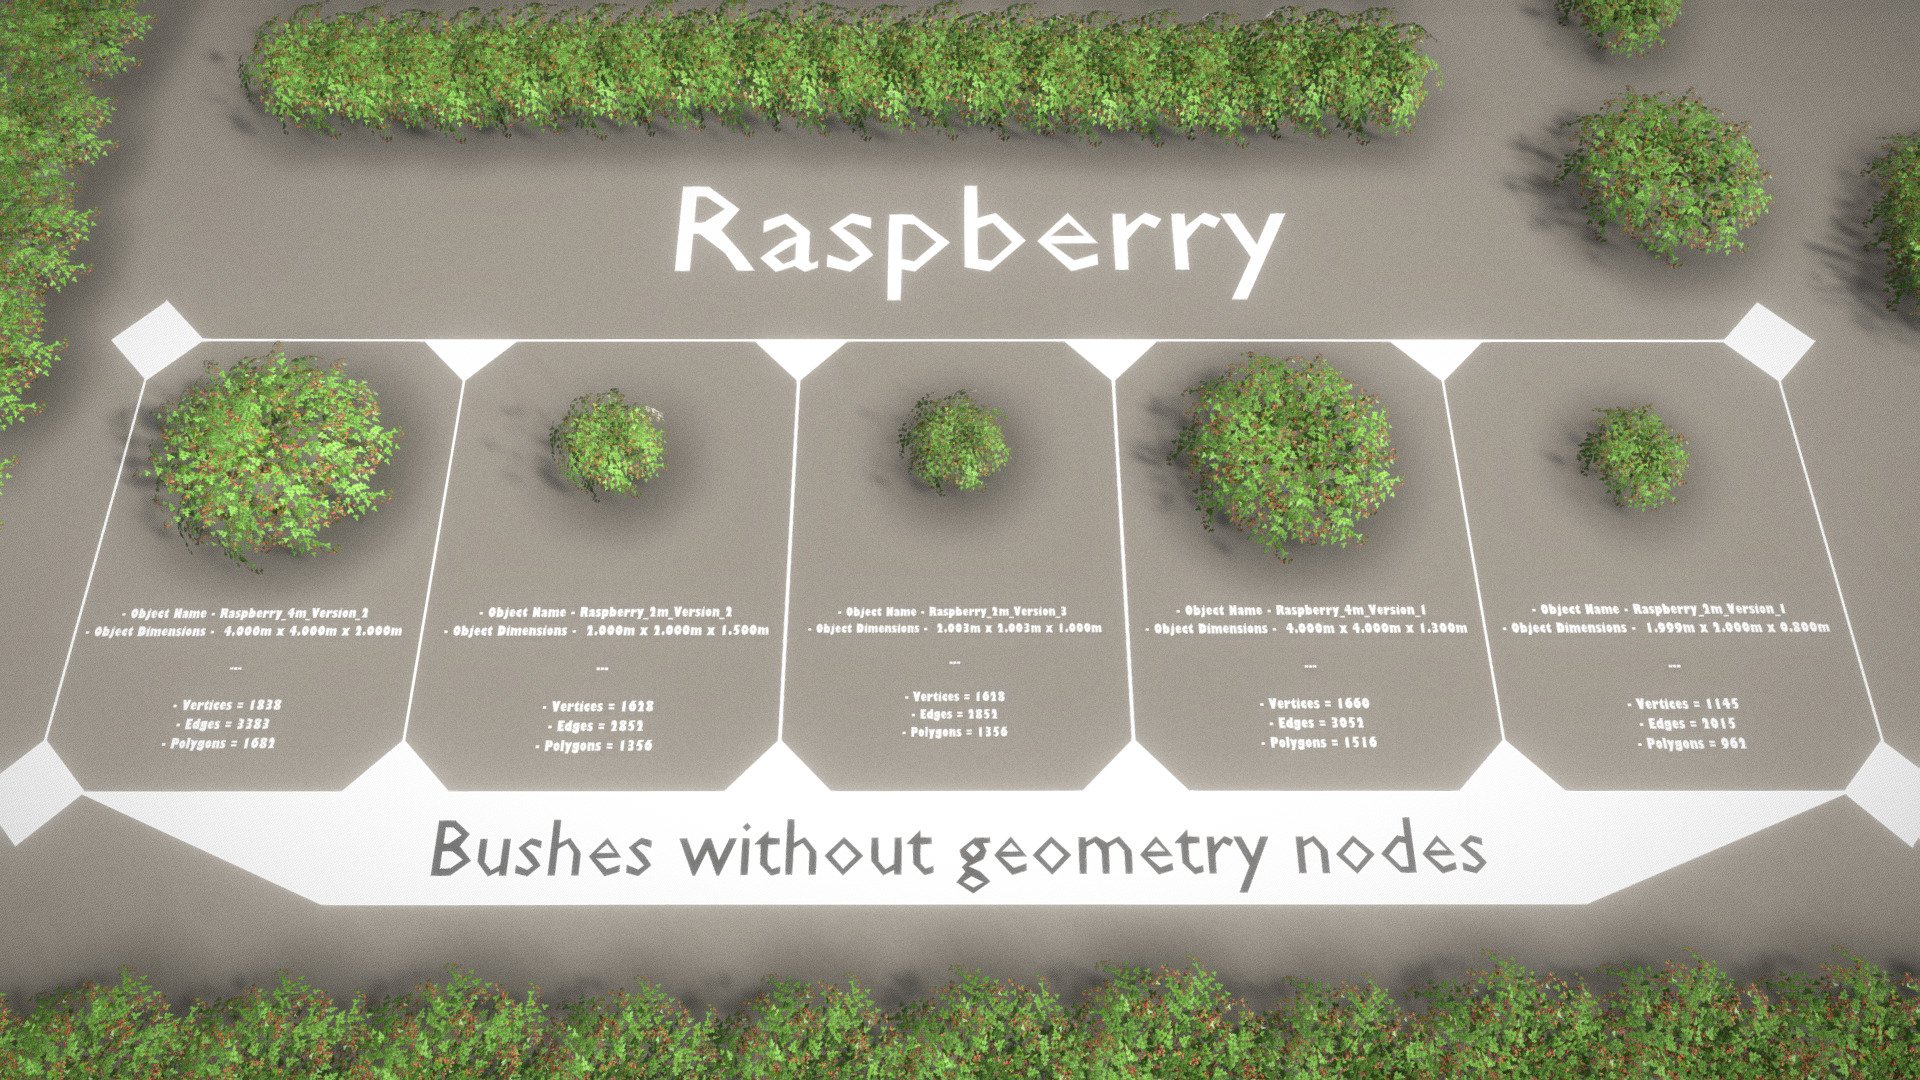 Here are some low-poly rasberry bushes and hedges.

Easy editable with geometry nodes in Blender 3.5.0.

The geometry nodes for creating these hedges are included.



Parts with out Geometry Nodes:




Raspberry_2m_Version_1 

Dimensions -  1.999m x 2.000m x 0.800m

Polygons = 962






Raspberry_2m_Version_2 

Dimensions -  2.000m x 2.000m x 1.500m

Polygons = 1356






Raspberry_2m_Version_3 

Dimensions -  2.003m x 2.003m x 1.000m

Polygons = 1356






Raspberry_4m_Version_1 

Dimensions -  4.000m x 4.000m x 1.300m

Polygons = 1516






Raspberry_4m_Version_2 

Dimensions -  4.000m x 4.000m x 2.000m

Polygons = 1682



Material - Raspberry:




Blend Mode: CLIP

Shadow Mode: CLIP

Raspberry_Nor.jpg(4096x4096px)

Raspberry_Ro.jpg(4096x4096px)

Raspberry_Col.png(4096x4096px)






Last update:
14:04:40  16.05.23

3D modelled and textured by 3DHaupt in Blender 3.5 3d model